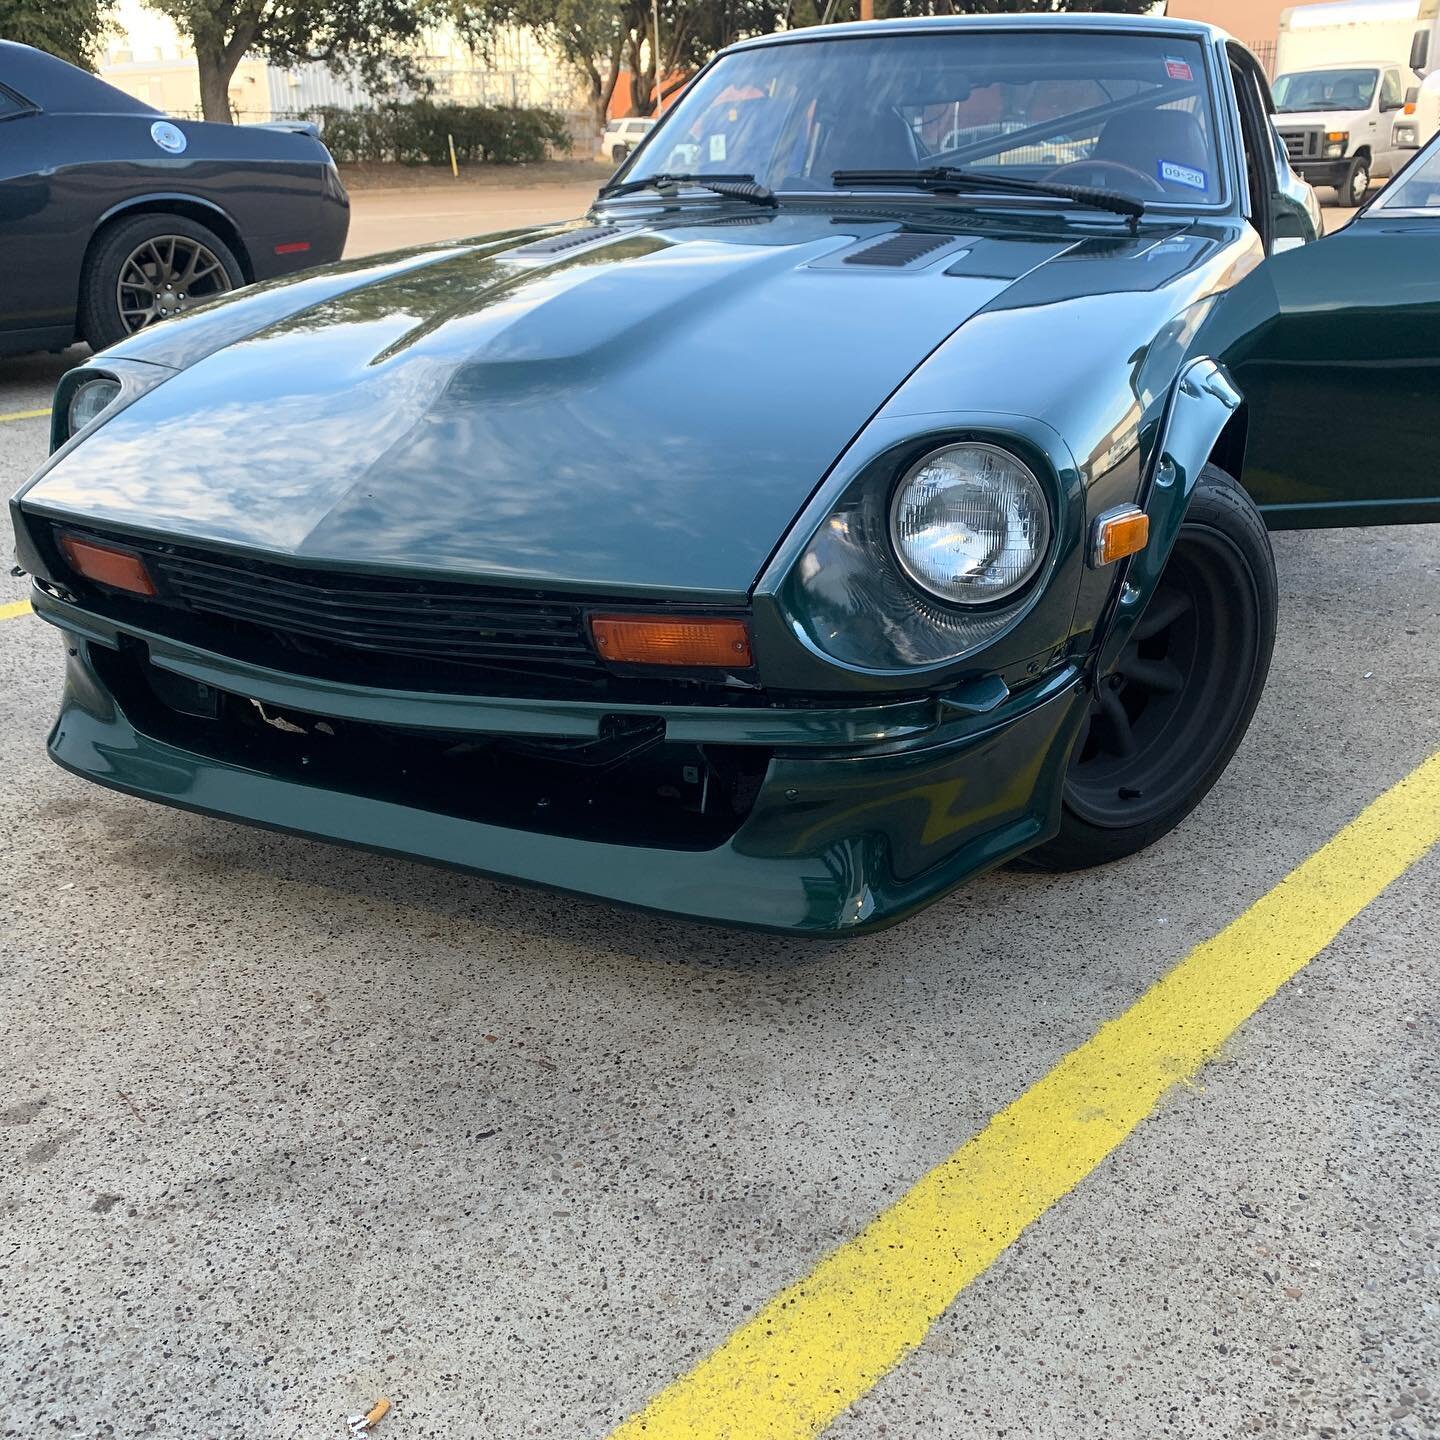 Look at this beauty 1977 Datsun 280z. Coming in to get the front seats swapped and minor interior work! Stay tuned #upholddesigns #custominteriors #automotive #datson240z #dallastexas